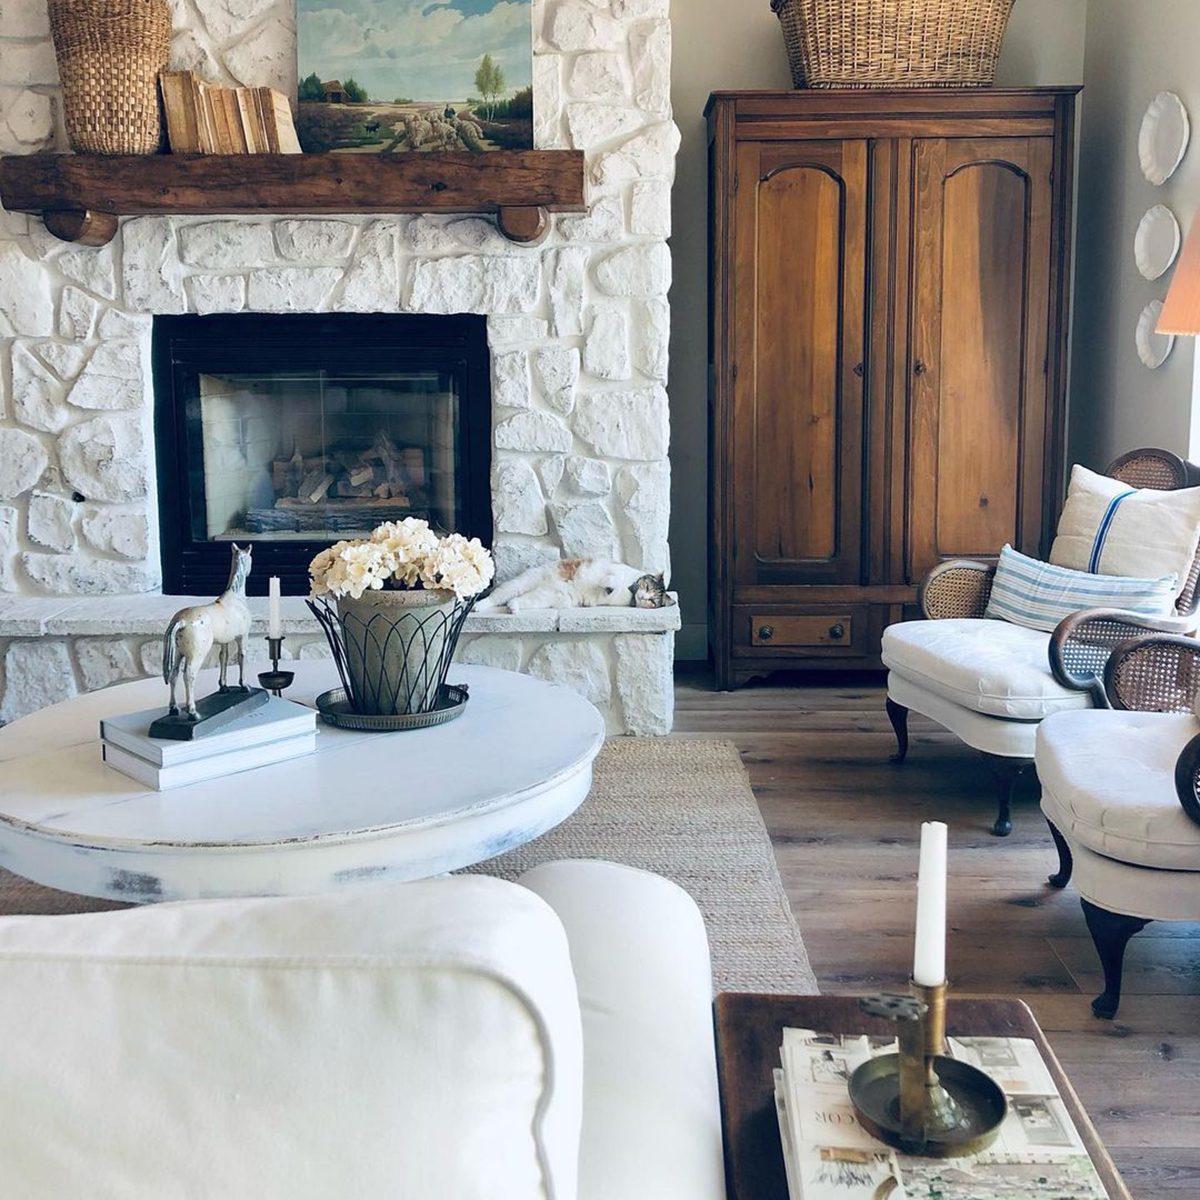 8 Ideas For Painting A Fireplace White Stone Courtesy @furniture At Tiffanys Instagram